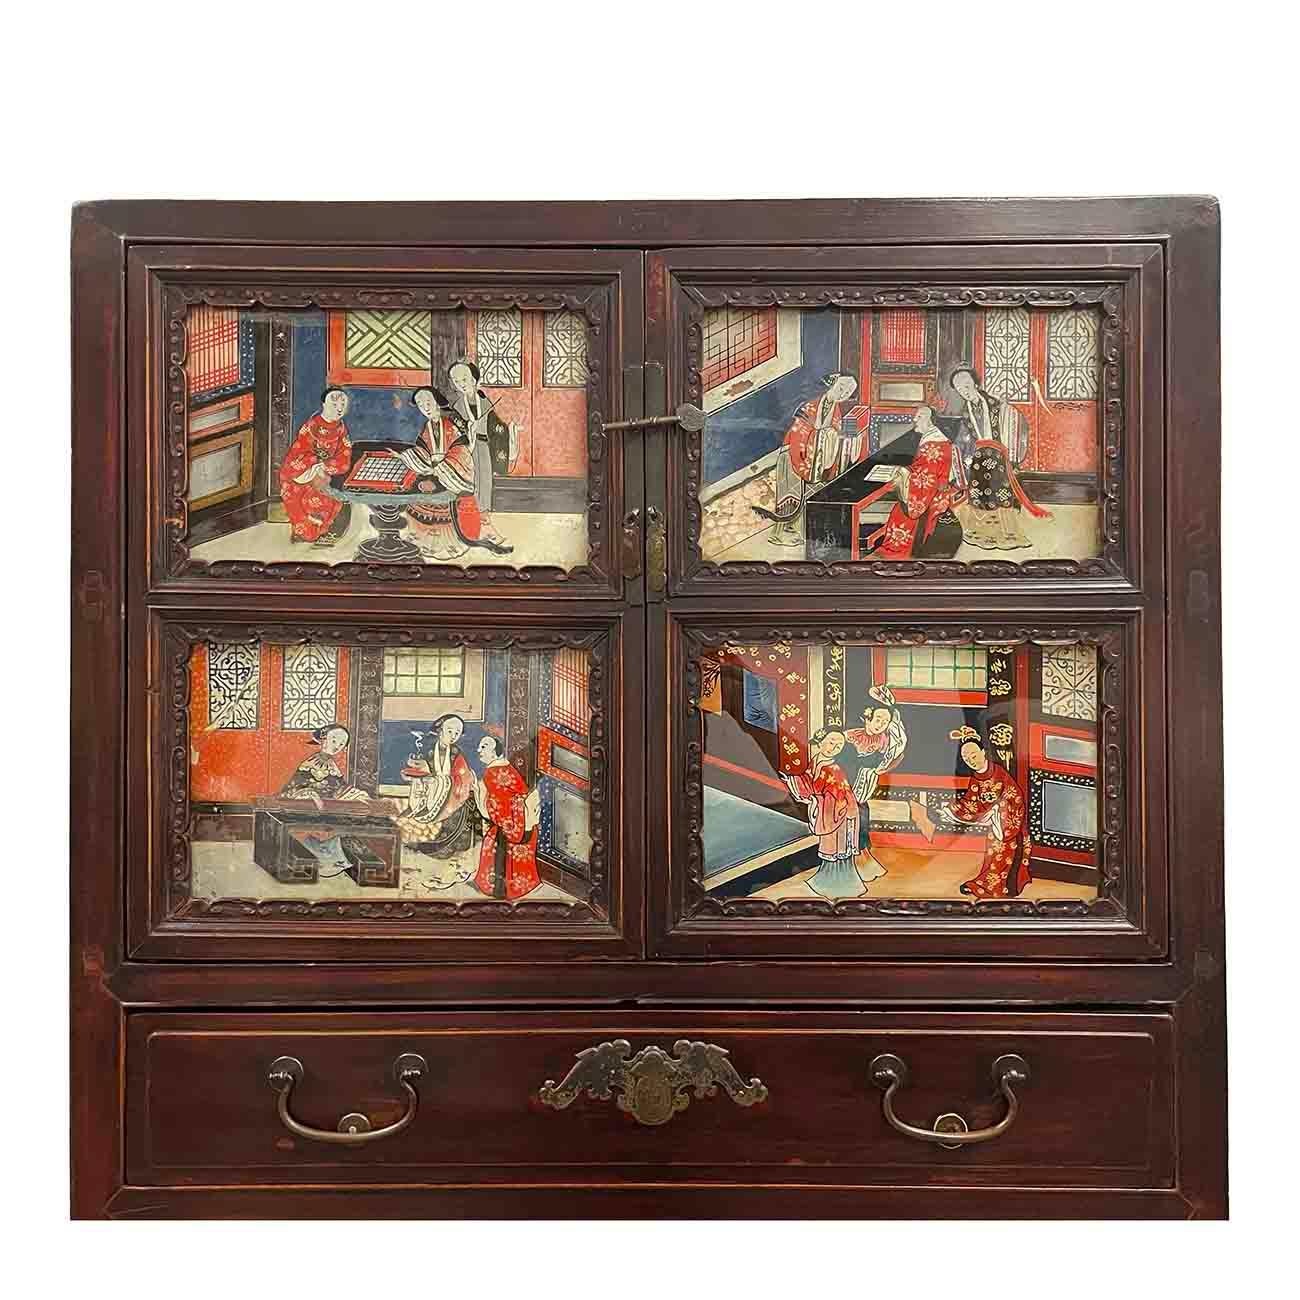 19th Century Antique Chinese Carved Fujian Armoire/Dresser with reverse painting In Fair Condition For Sale In Pomona, CA